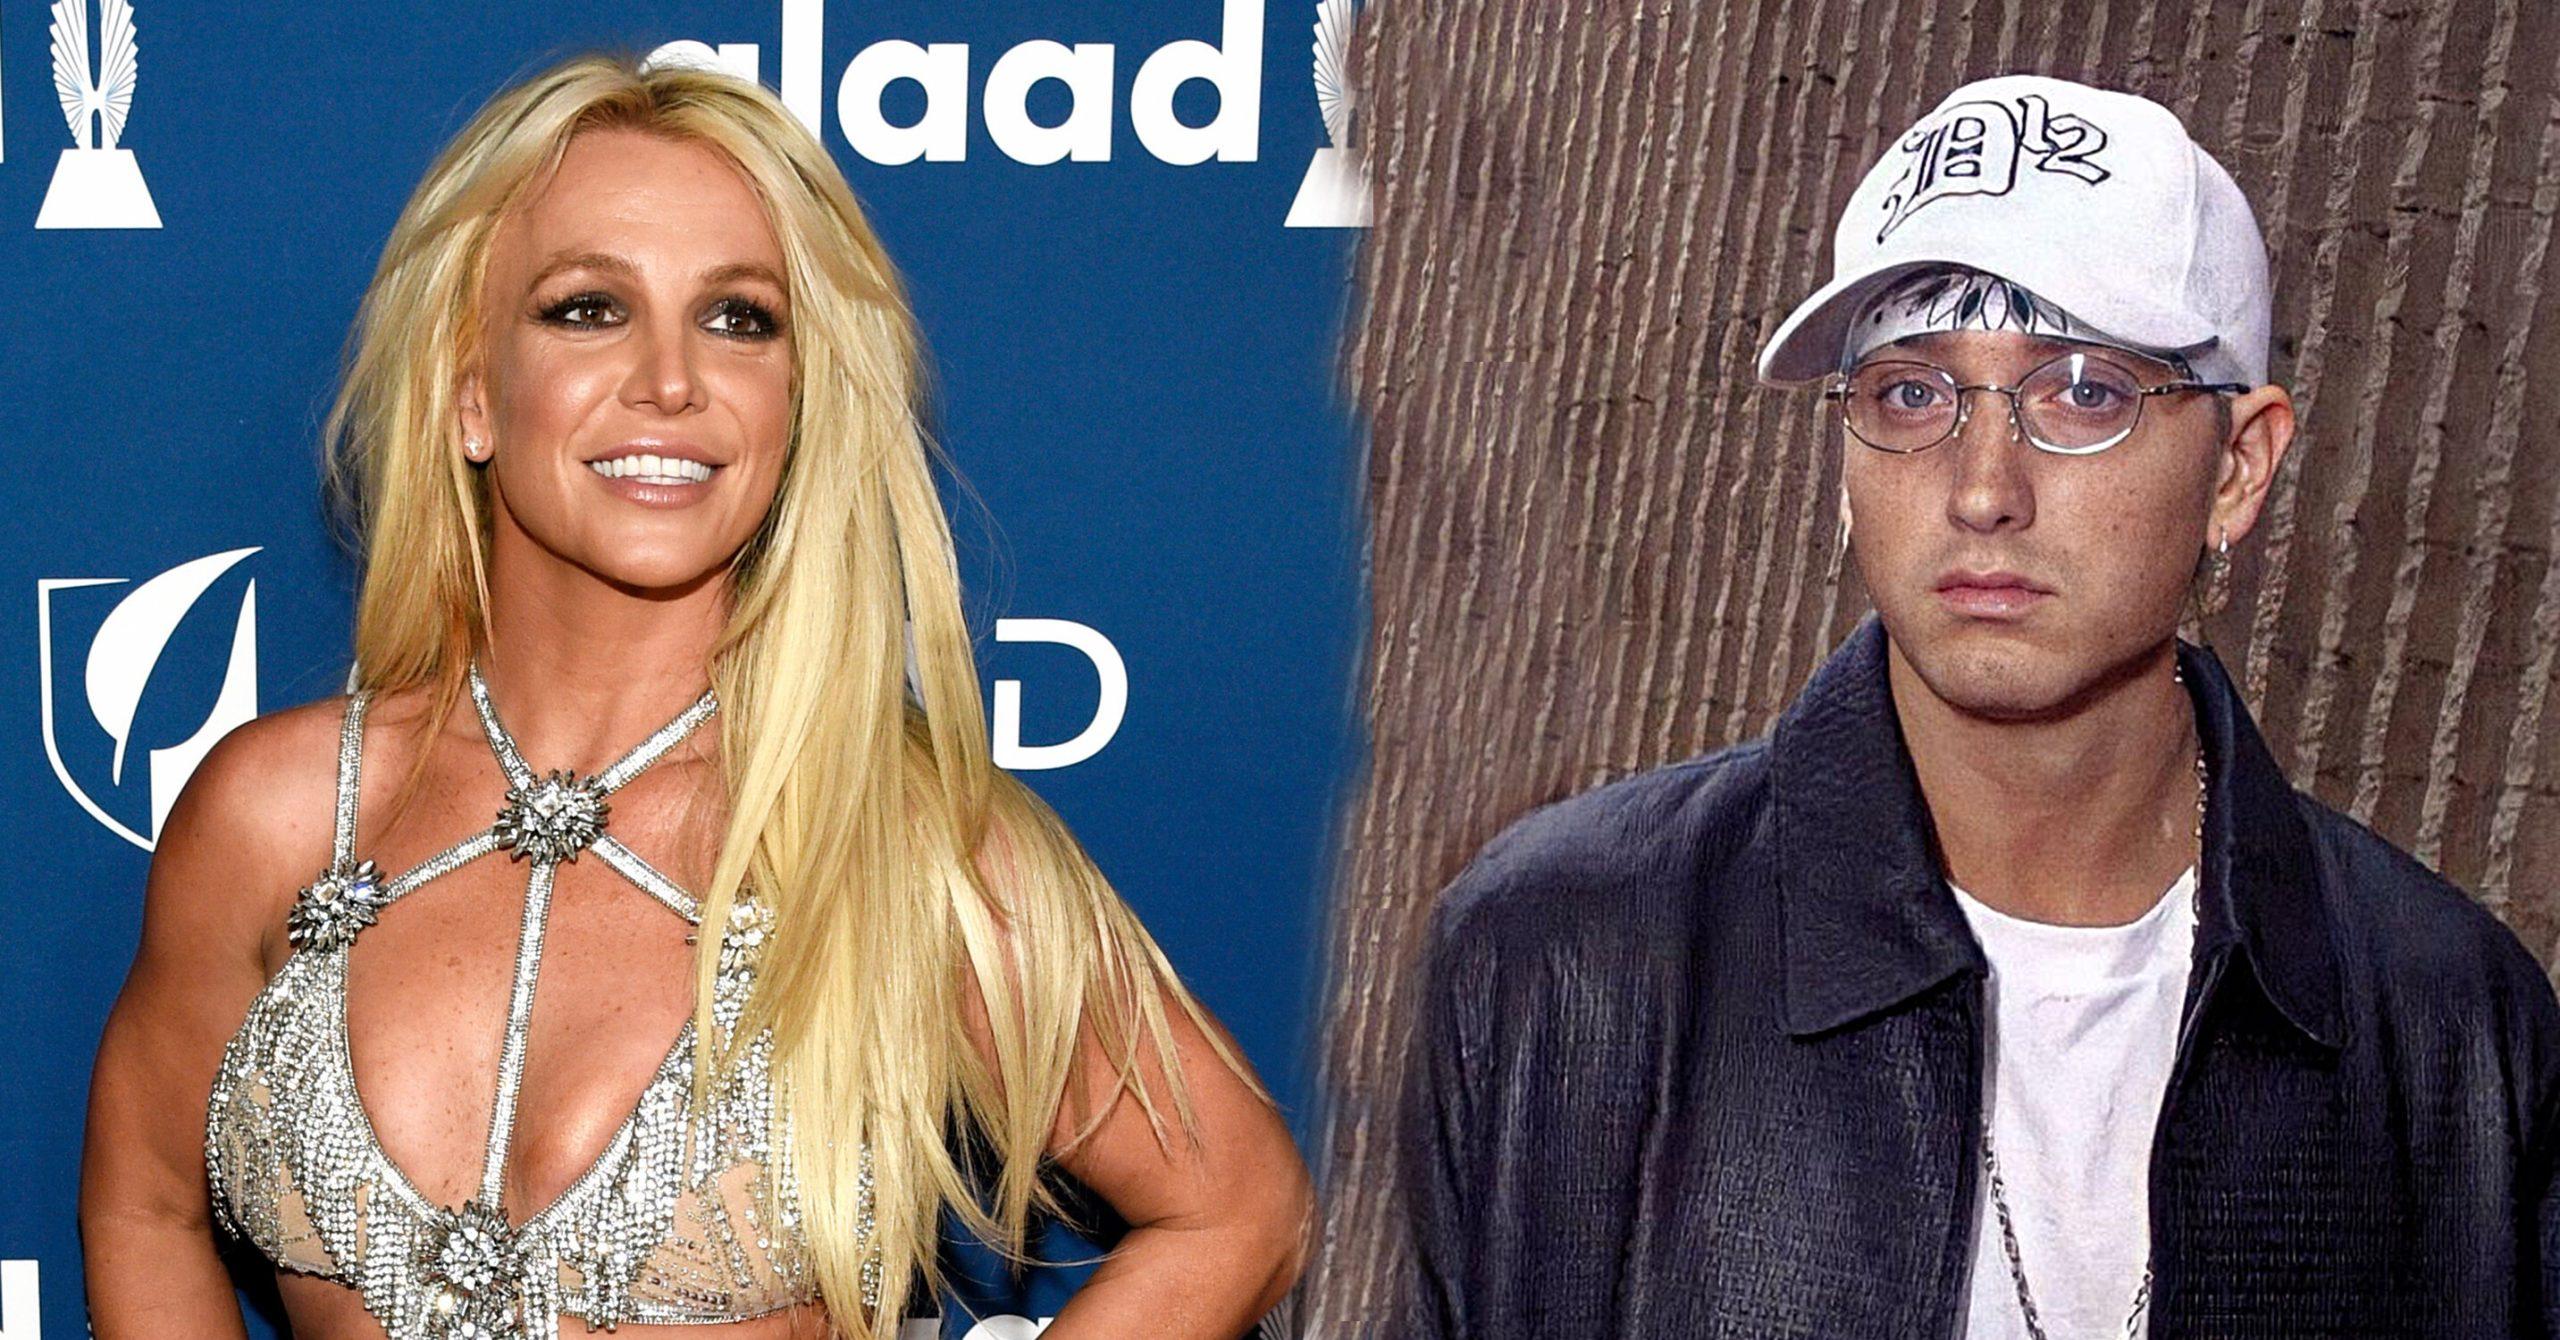 Britney Spears mentions Eminem's "Kim" in her new book